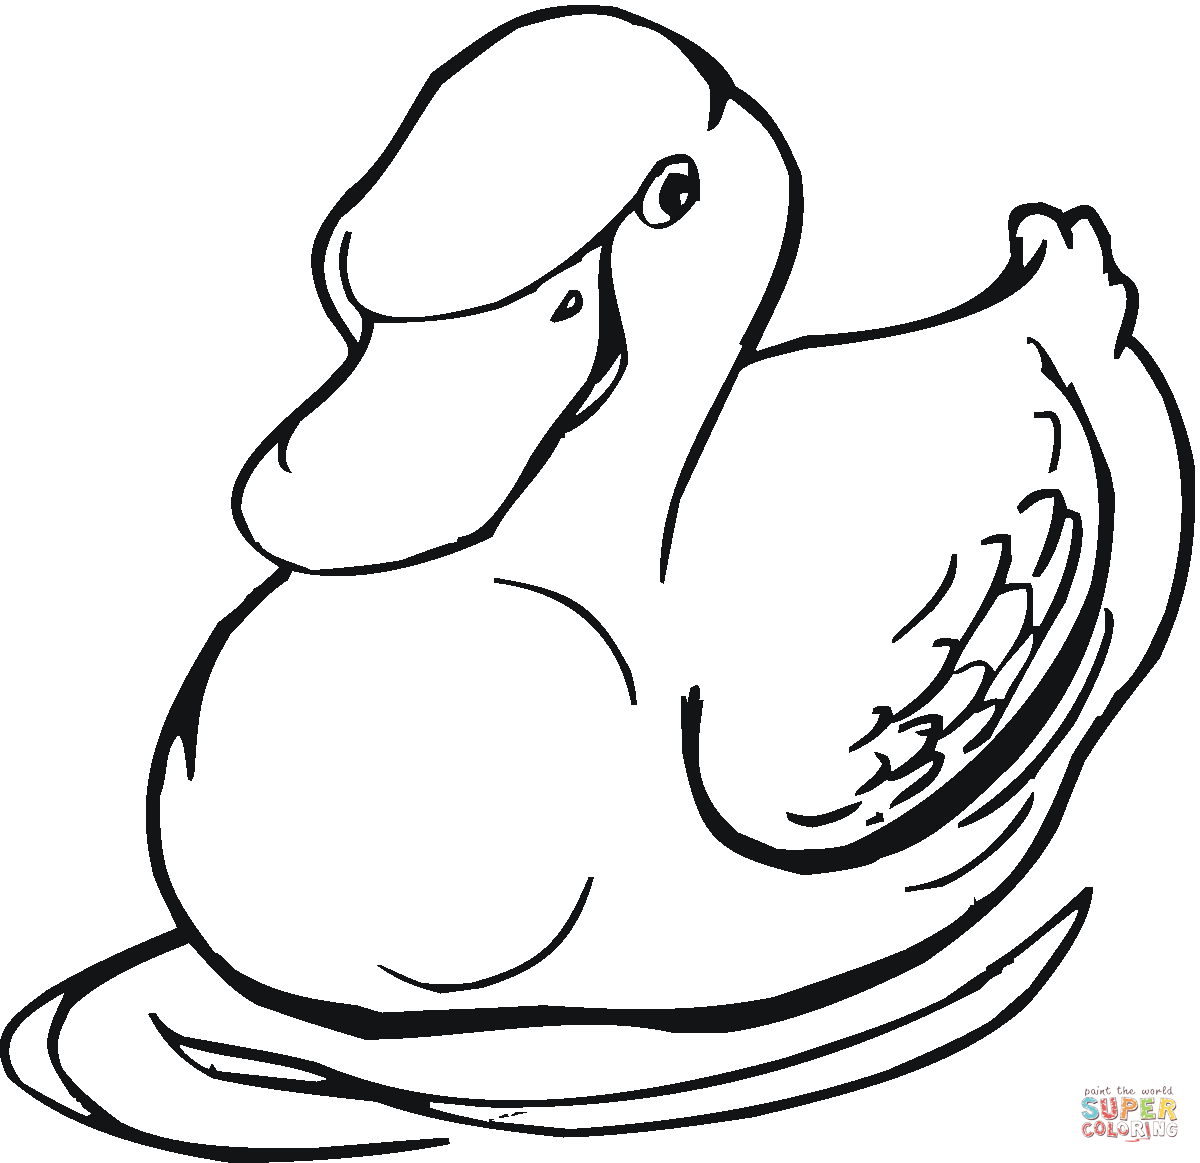 Ducks coloring pages | Free Coloring Pages